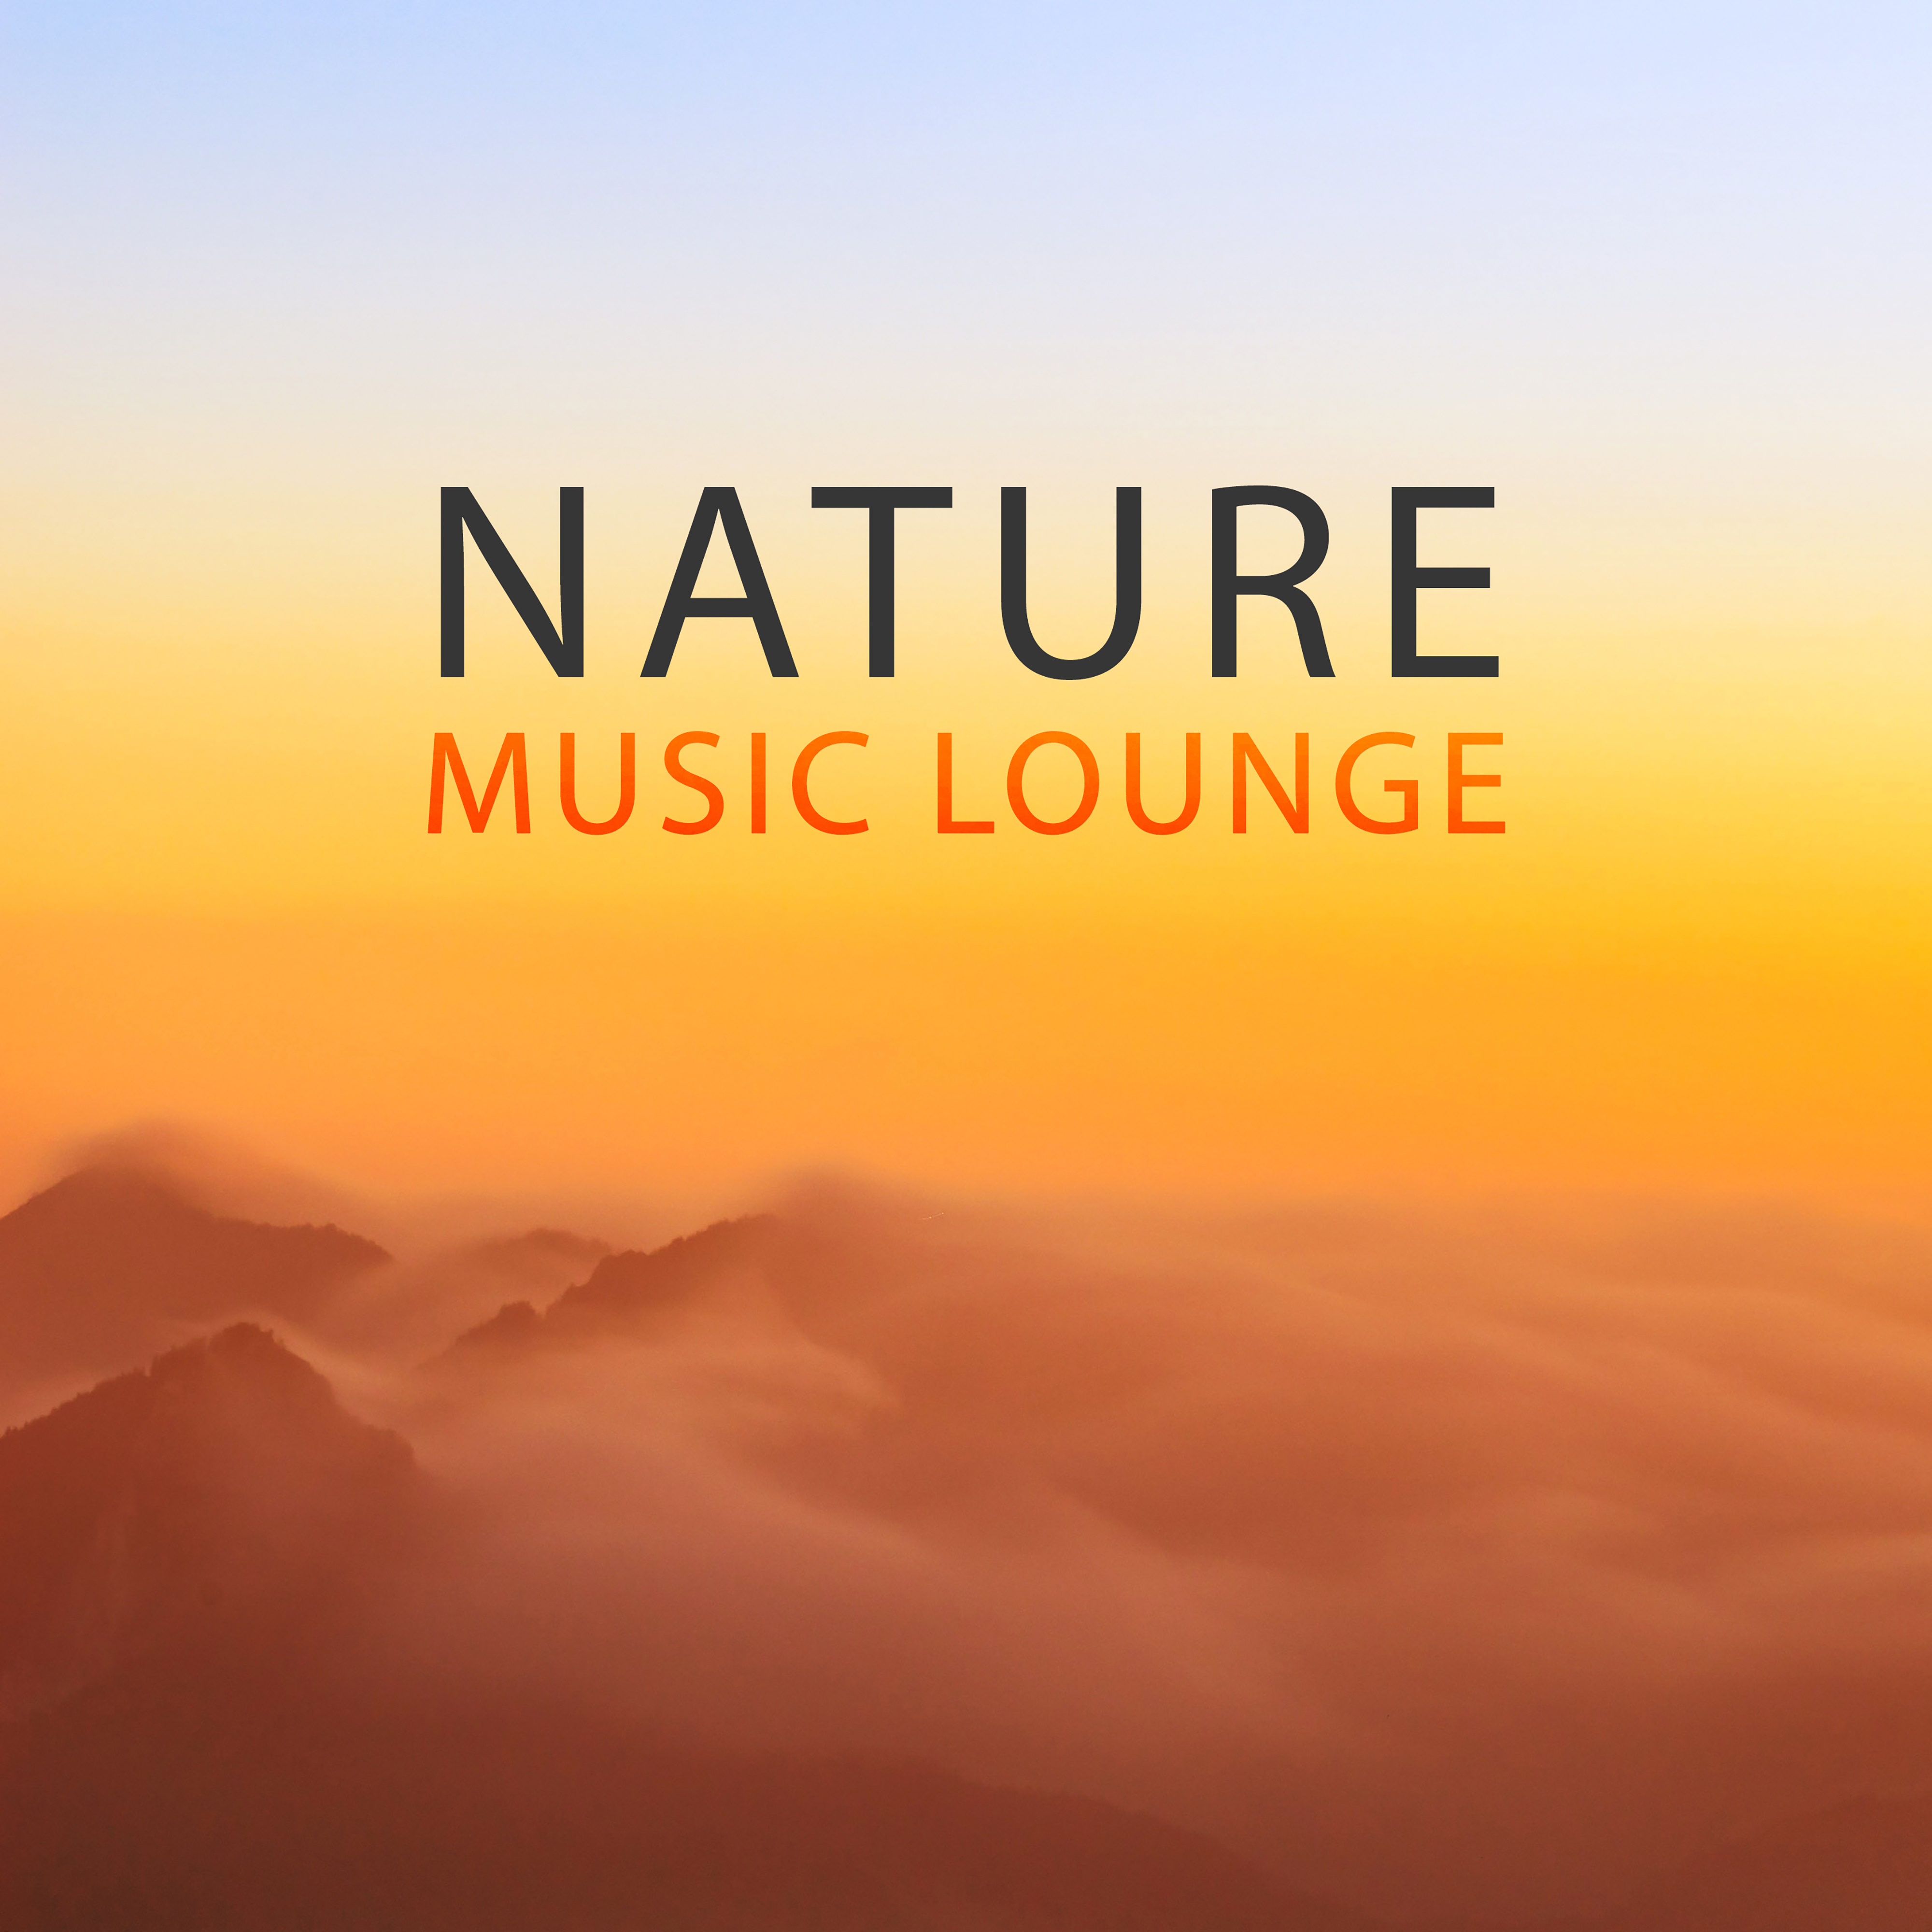 Nature Music Lounge – Calmning Sounds of Nature, New Age, Deep Relaxation, Relaxing Music Therapy